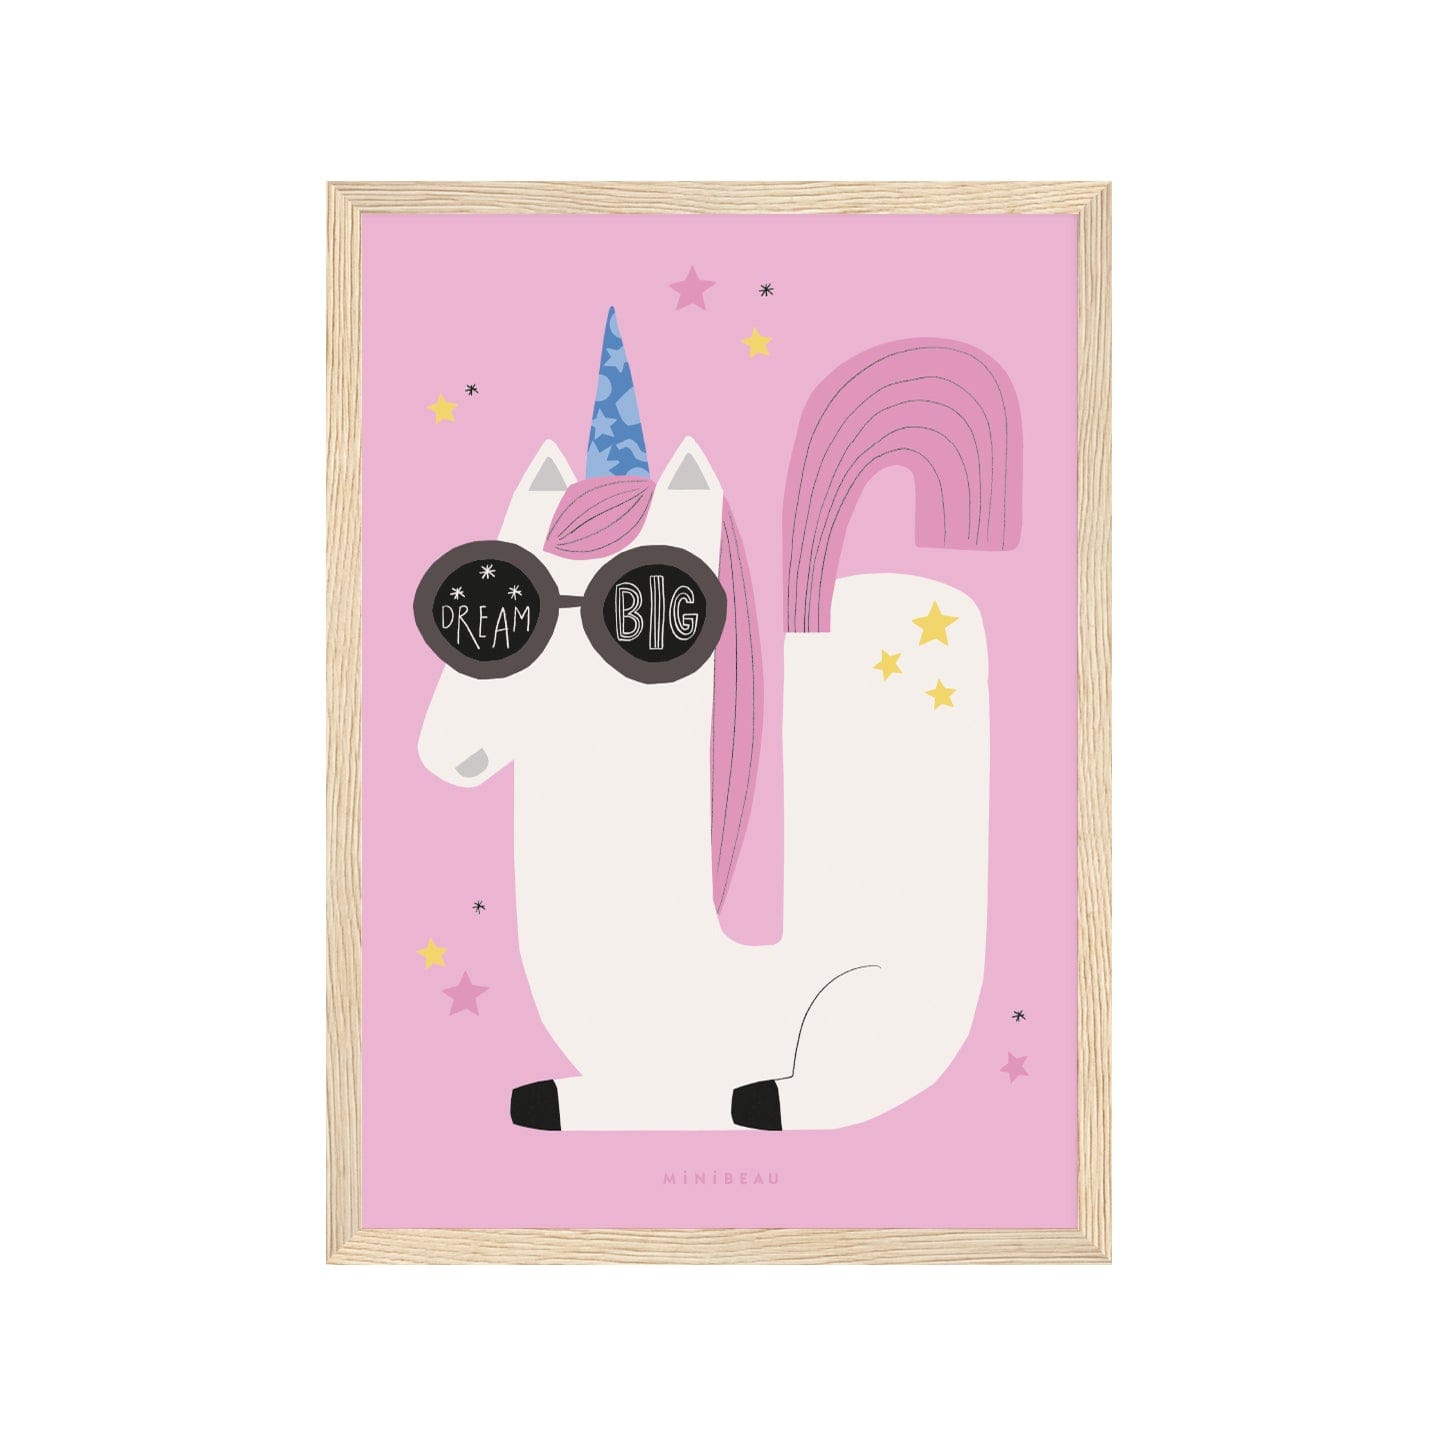 Art print in a light wood frame. Our Happy Alphabet 'U' Art Print shows a cool, sunglasses-wearing white unicorn, laying in the shape of a U with a pink tail and blue horn with yellow stars on its back. The words DREAM BIG are in the lenses of the sunglasses. All on a pink background.